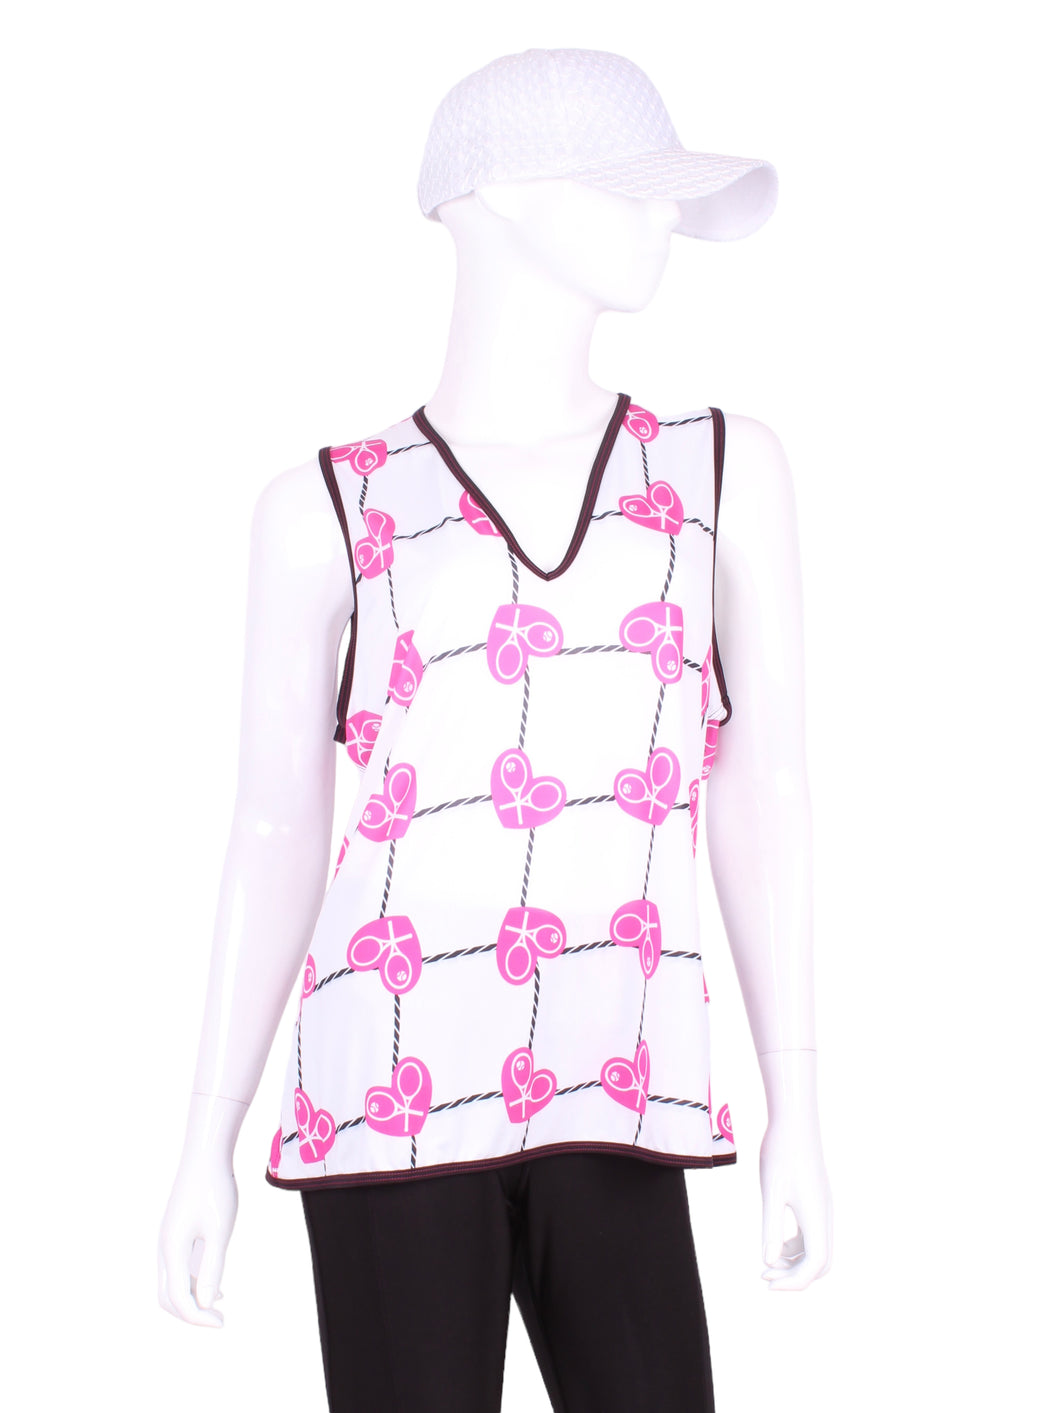 An elegant tennis tank top - silky soft - light - and quick drying breathable fabric.  Vee front and tee back with two needle cover stitch at each seam.  Smooth binding finishes the edges with class.  The most comfortable and feminine tennis top.